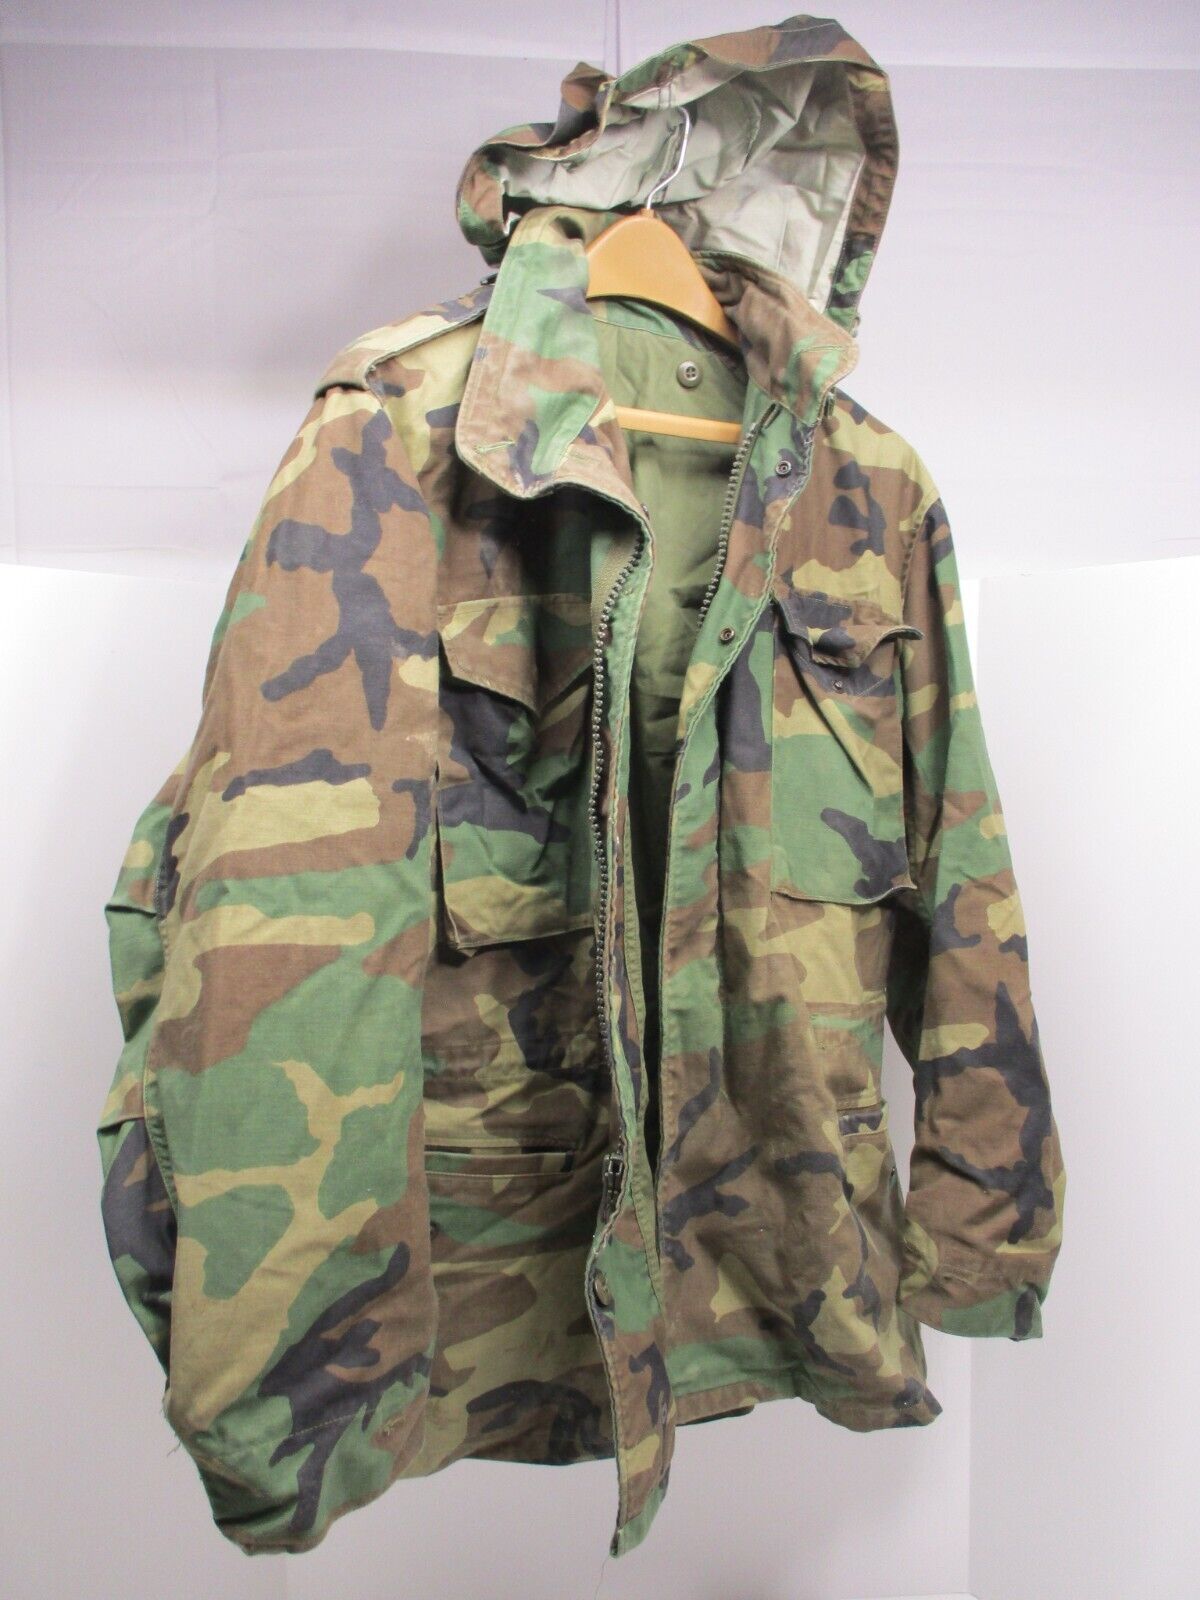 Miltary issue woodland camo cold weather coat w/lining and hood - Medium Regular